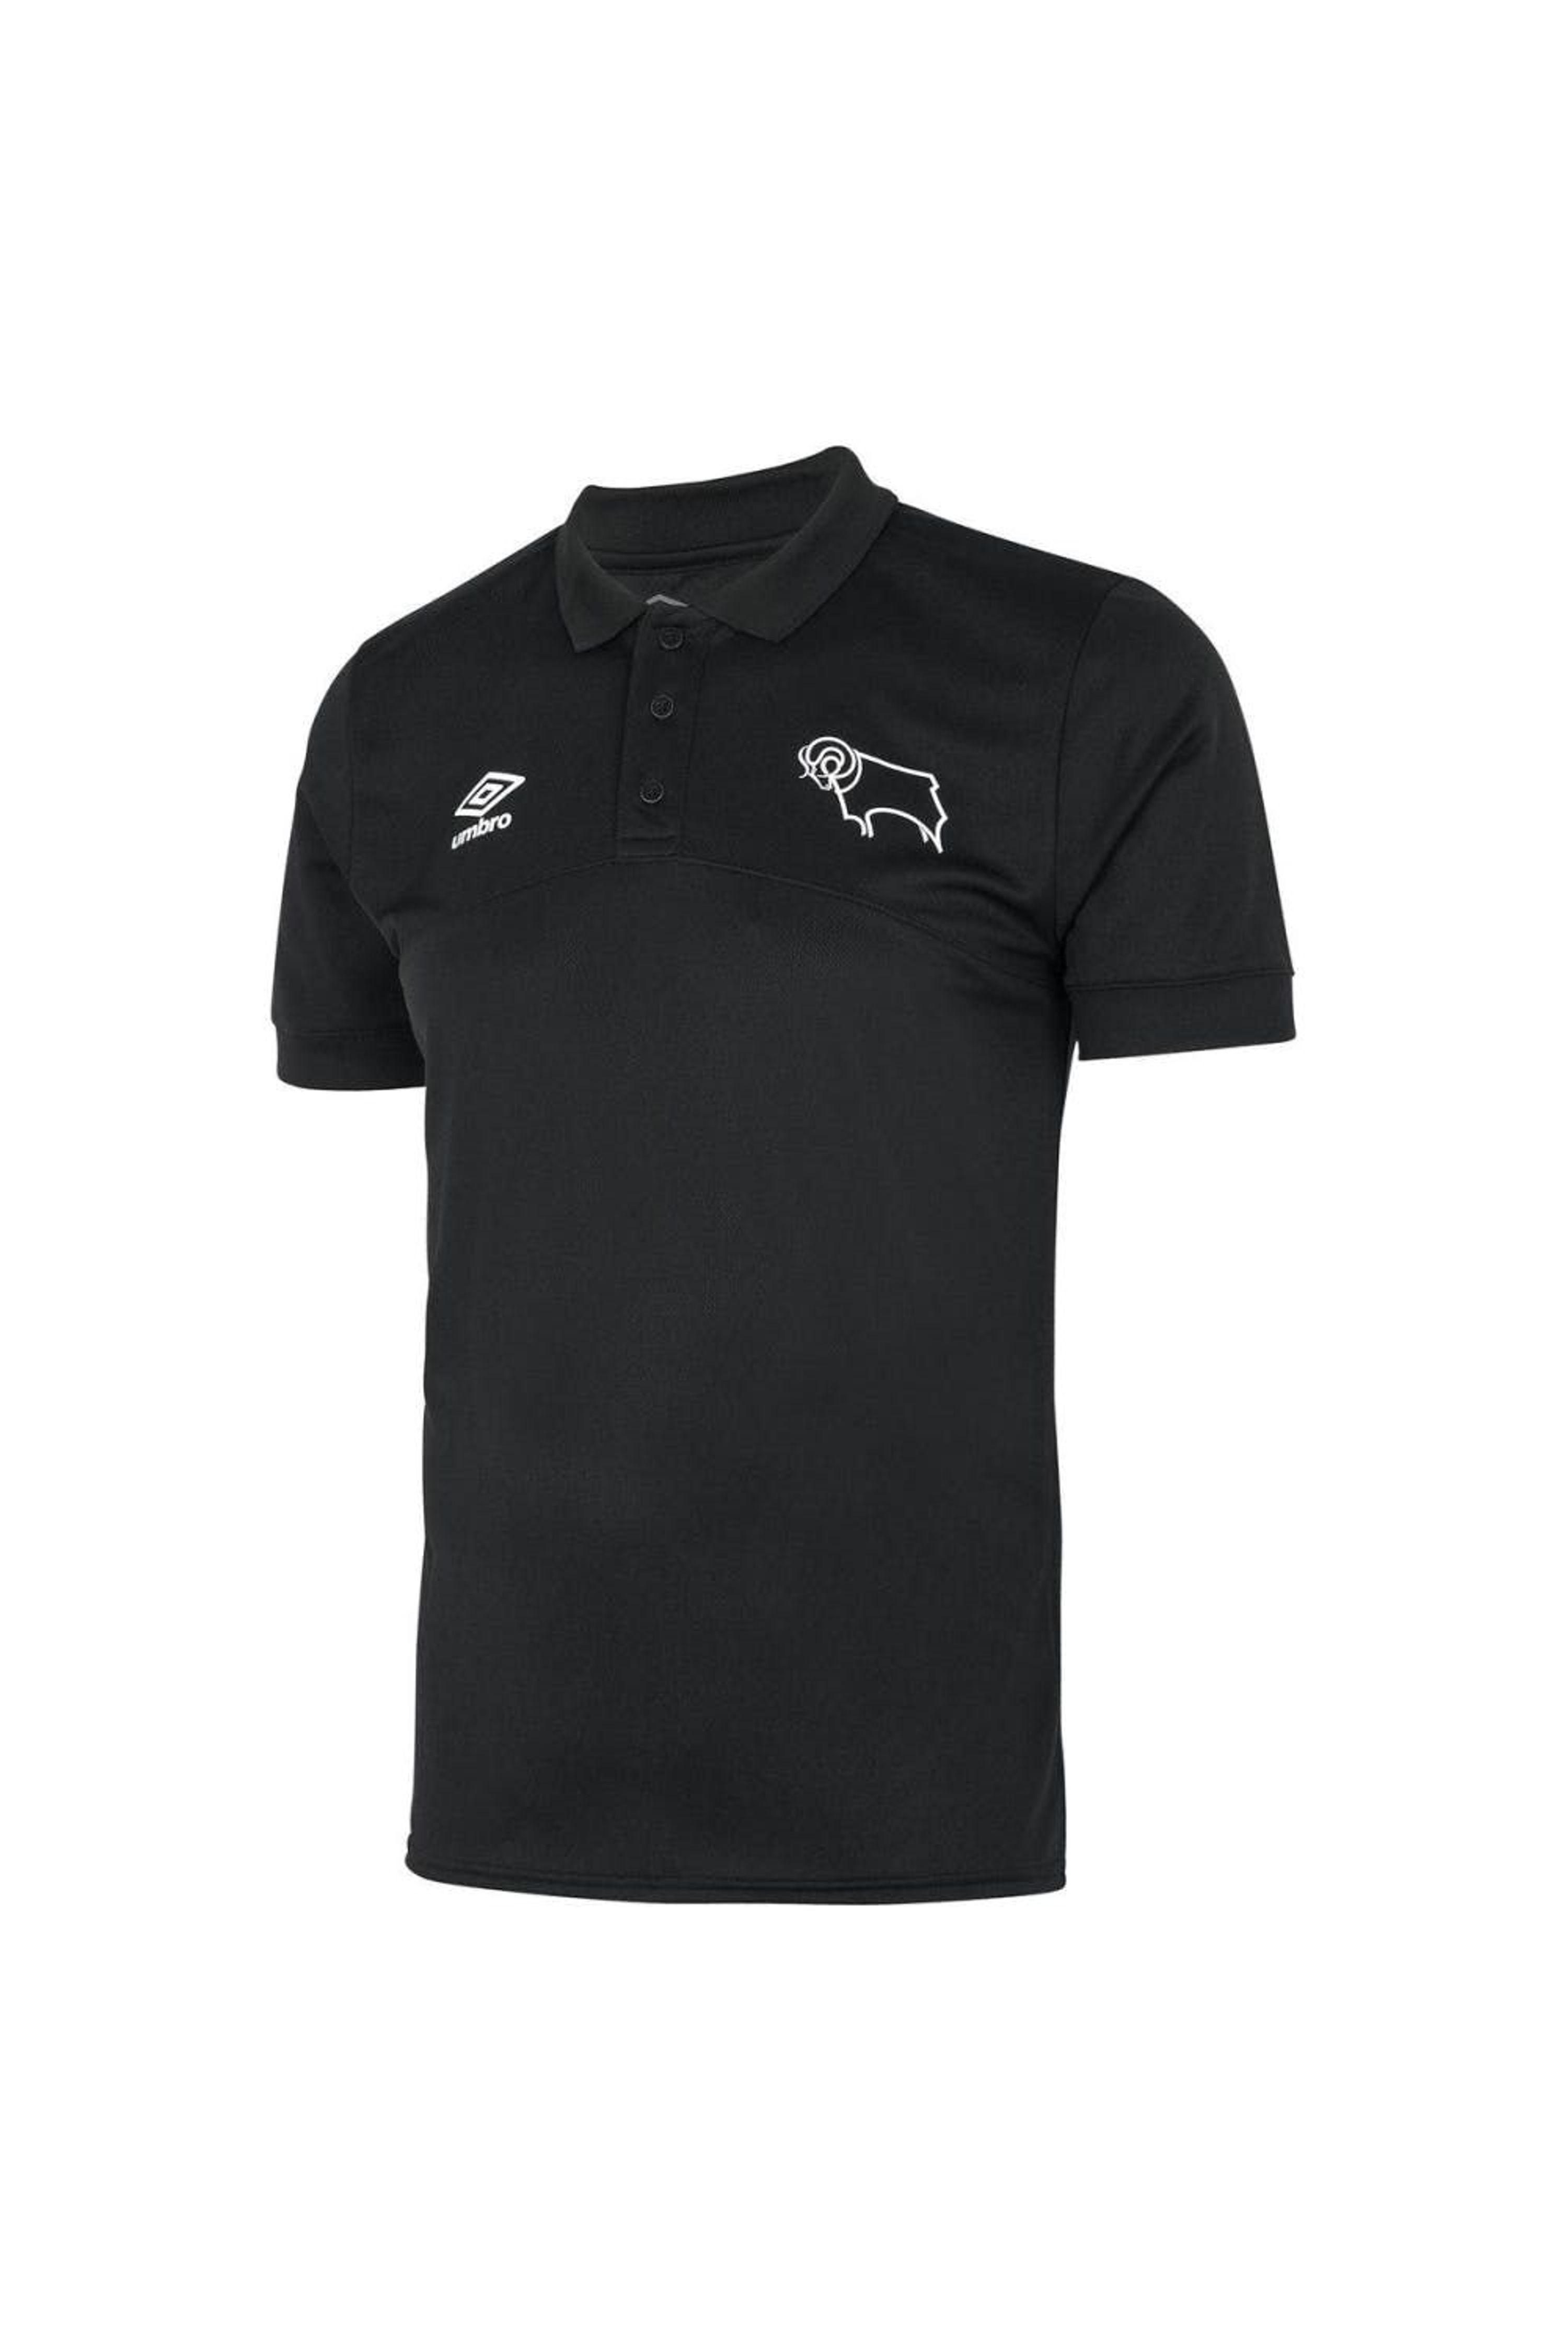 Umbro Derby County Fc Polo Shirt in Black for Men | Lyst